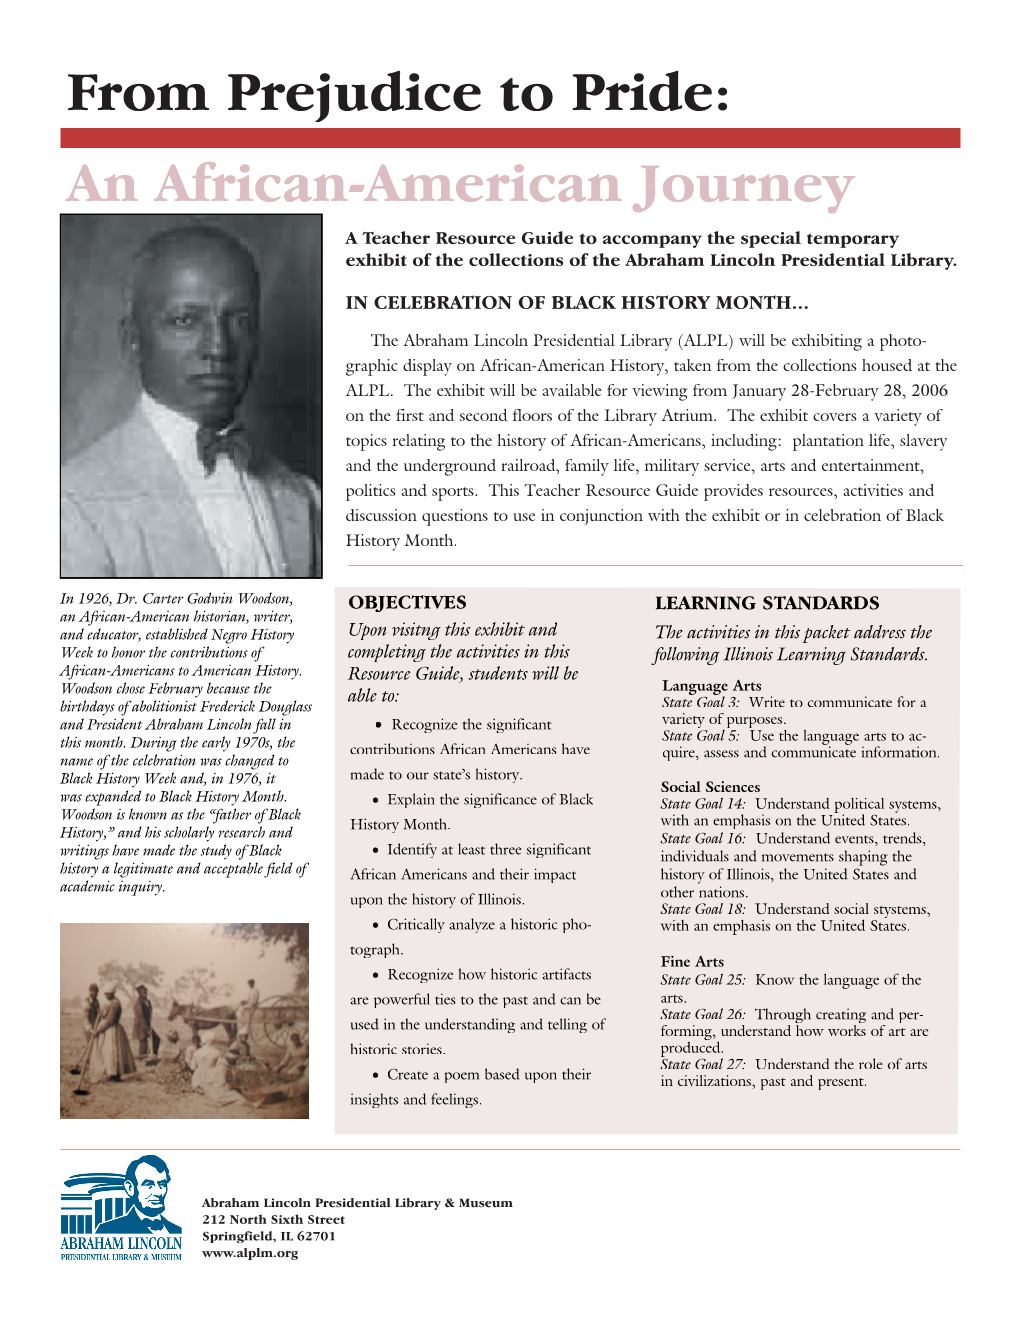 An African-American Journey a Teacher Resource Guide to Accompany the Special Temporary Exhibit of the Collections of the Abraham Lincoln Presidential Library